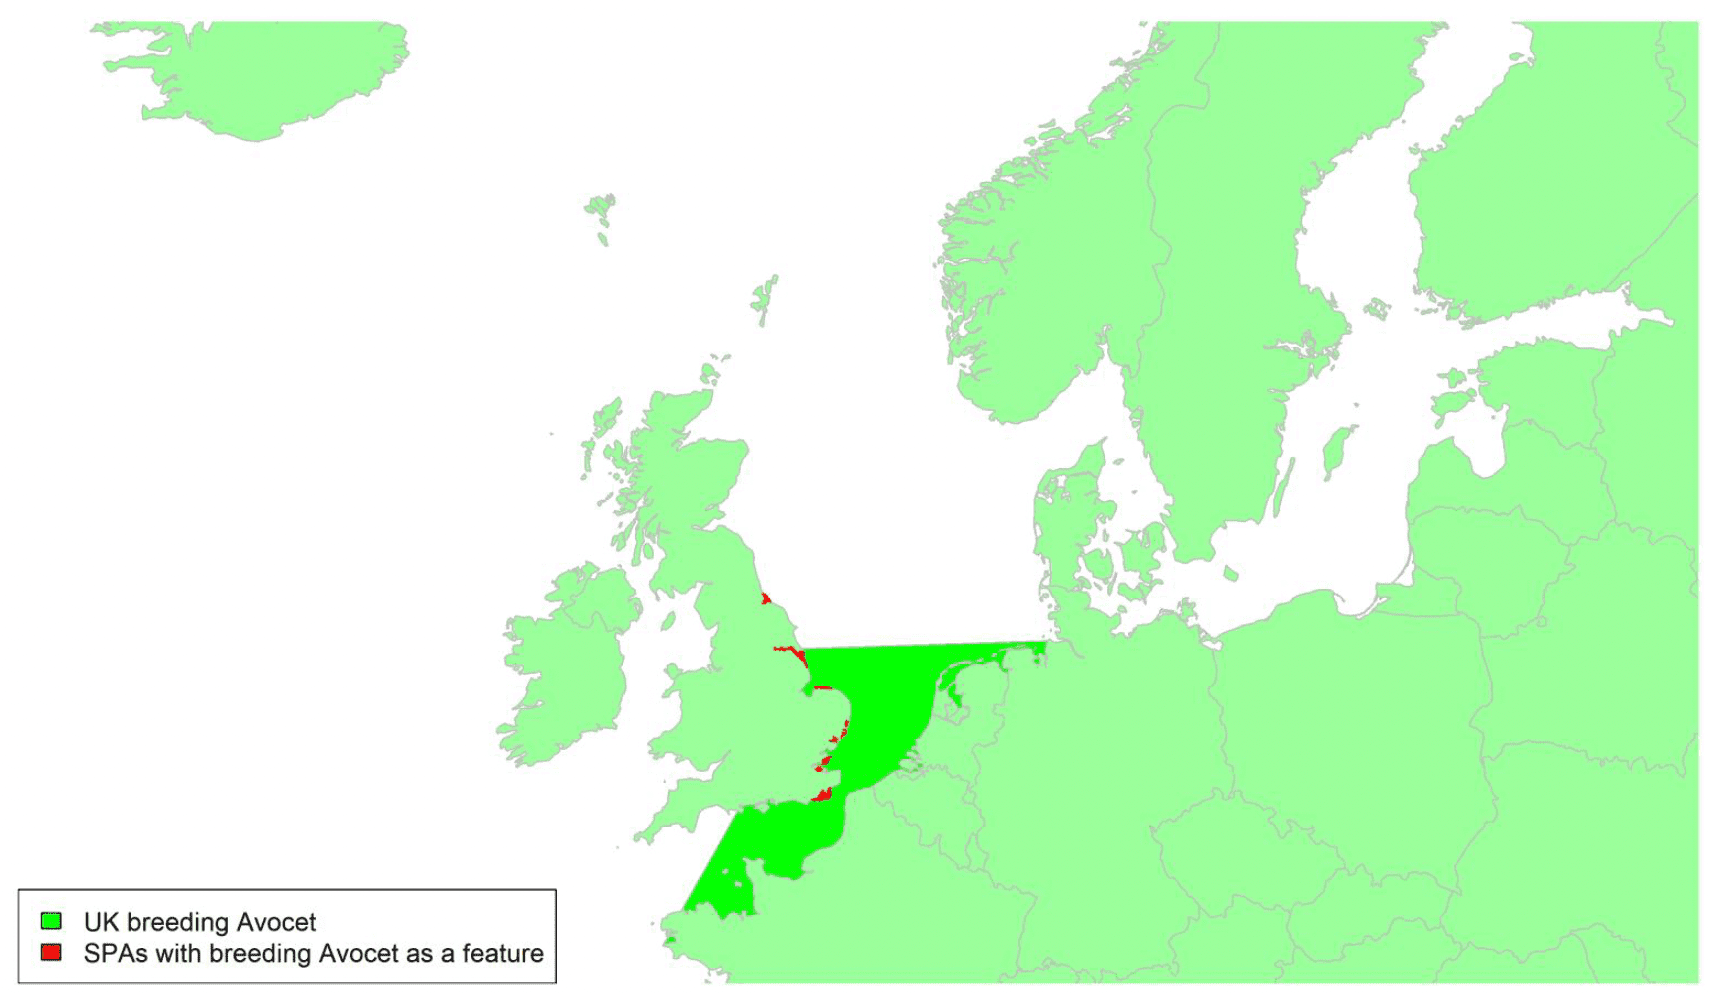 Map of North West Europe showing migratory routes and SPAs within the UK for breeding Avocet as described in the text below.